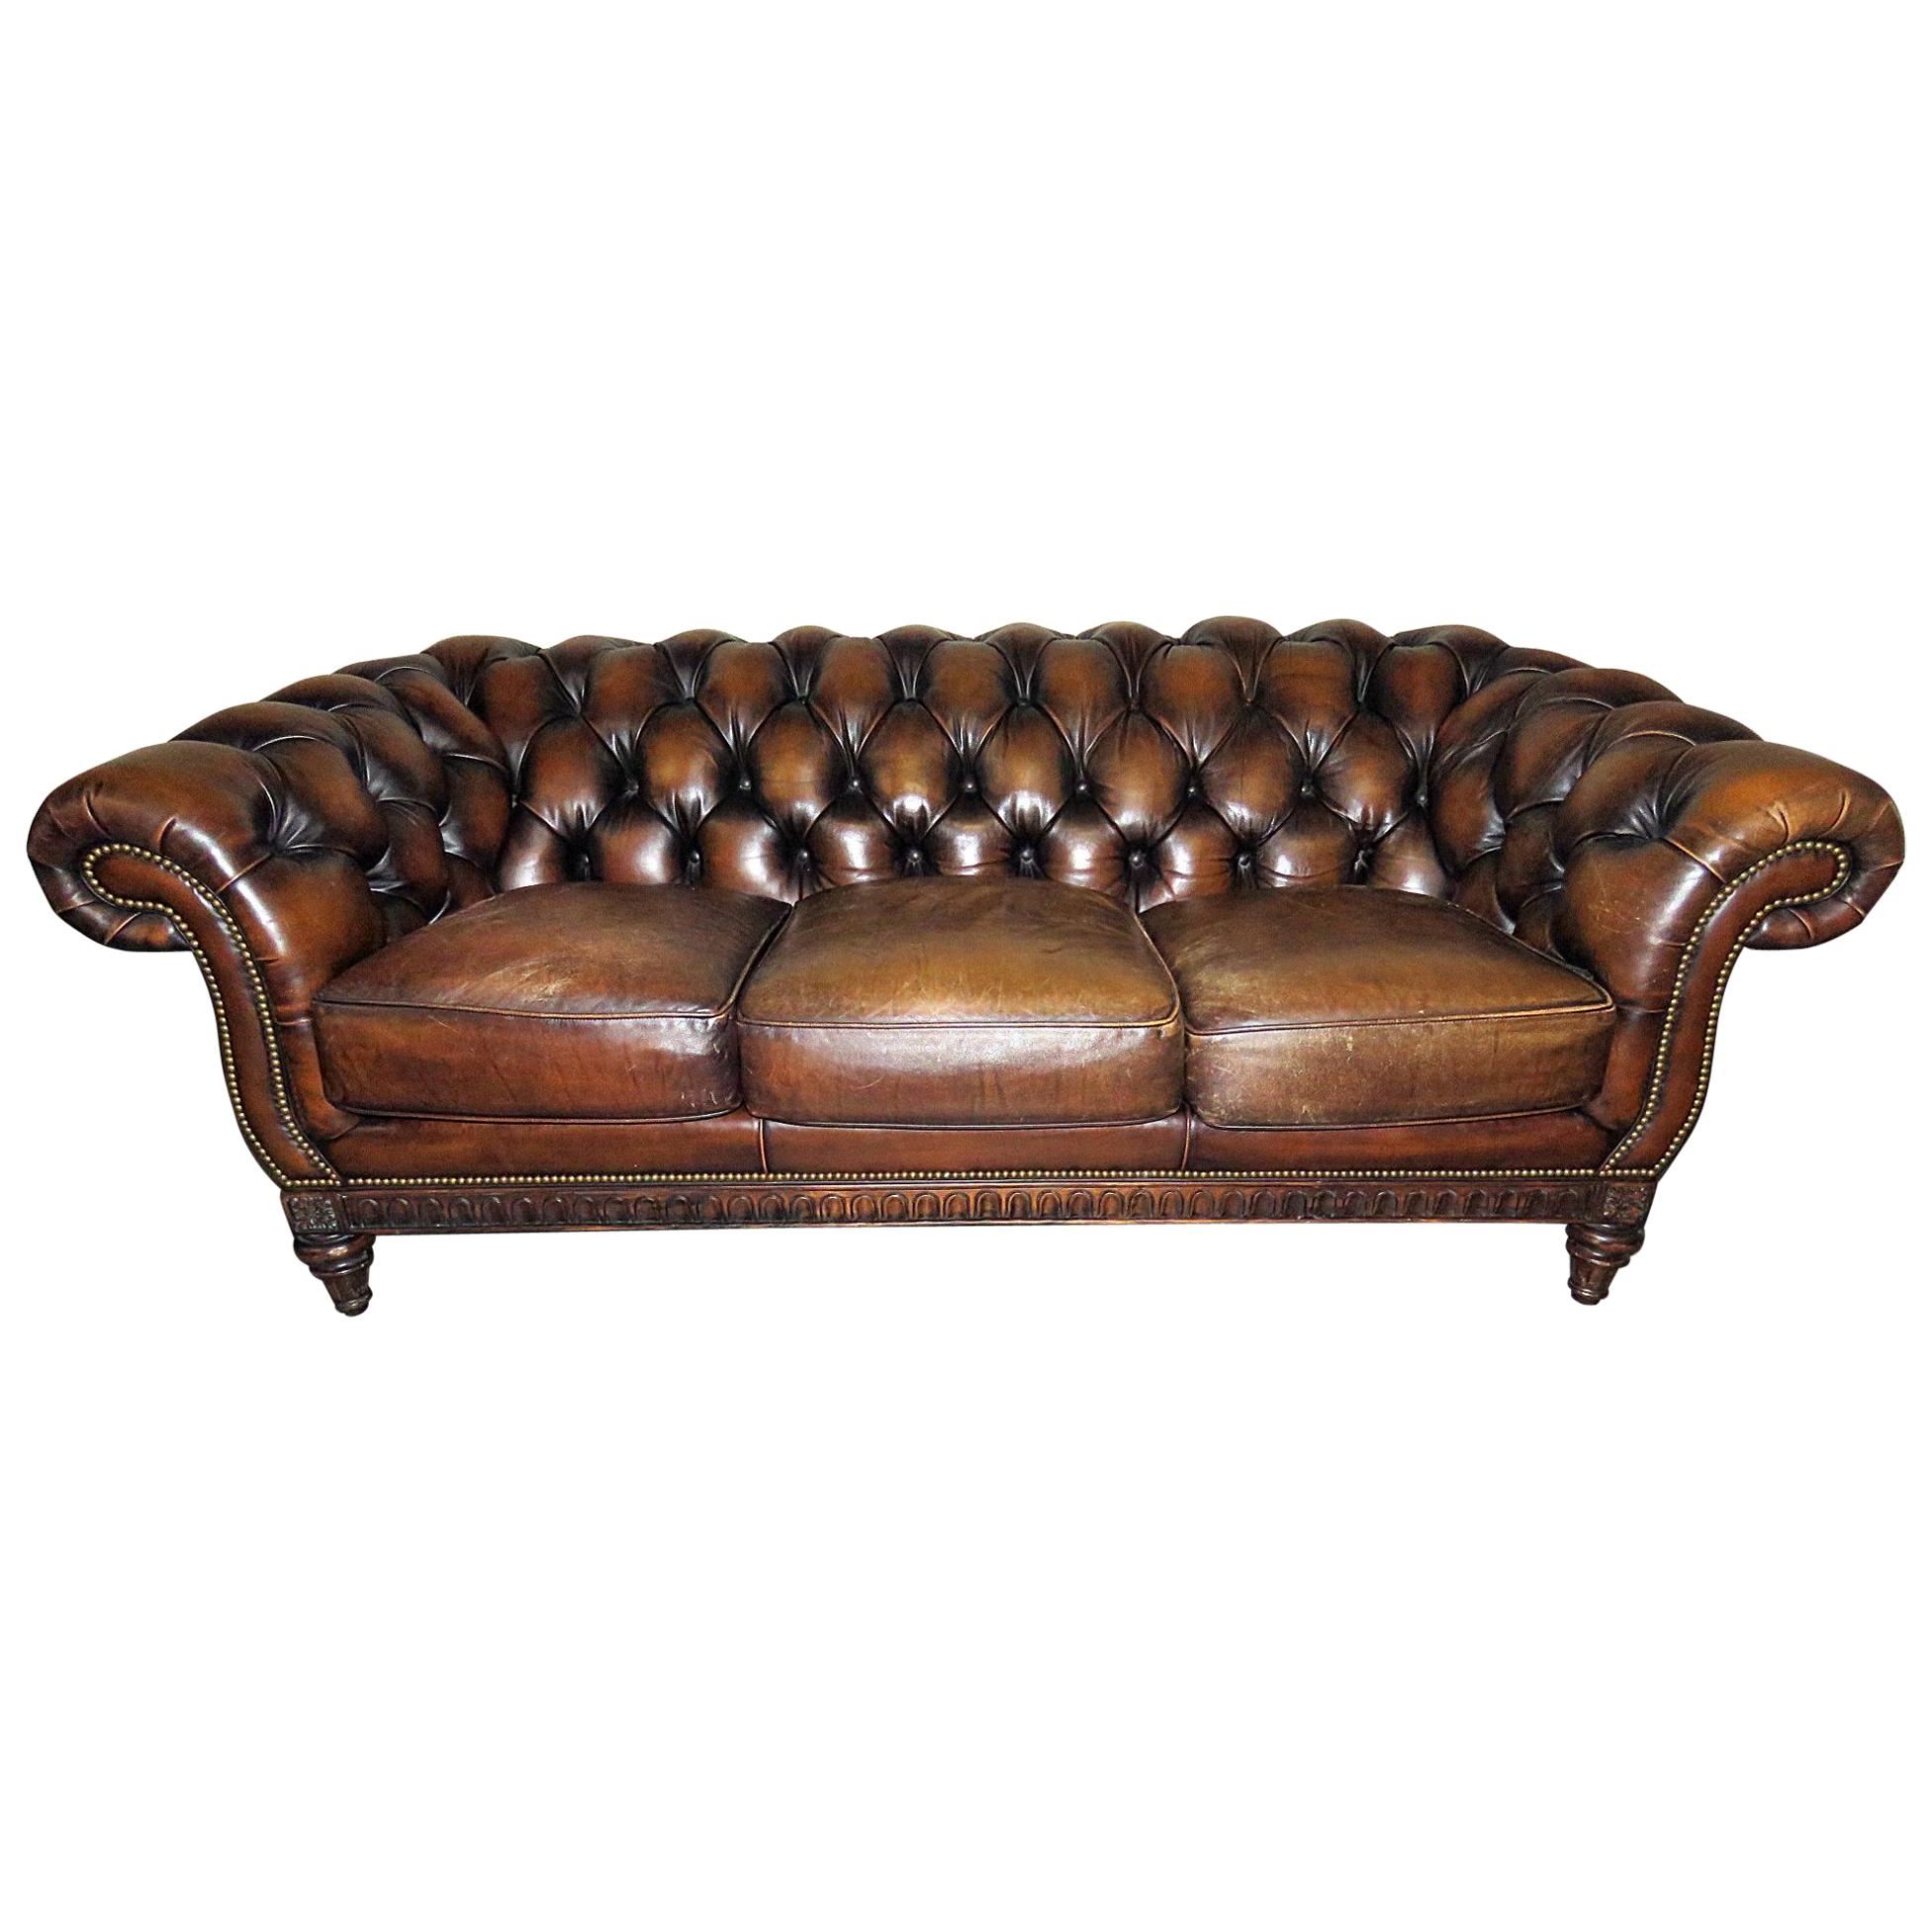 Tradtional Tobacco Leather French Louis XVI Style Chesterfield Sofa